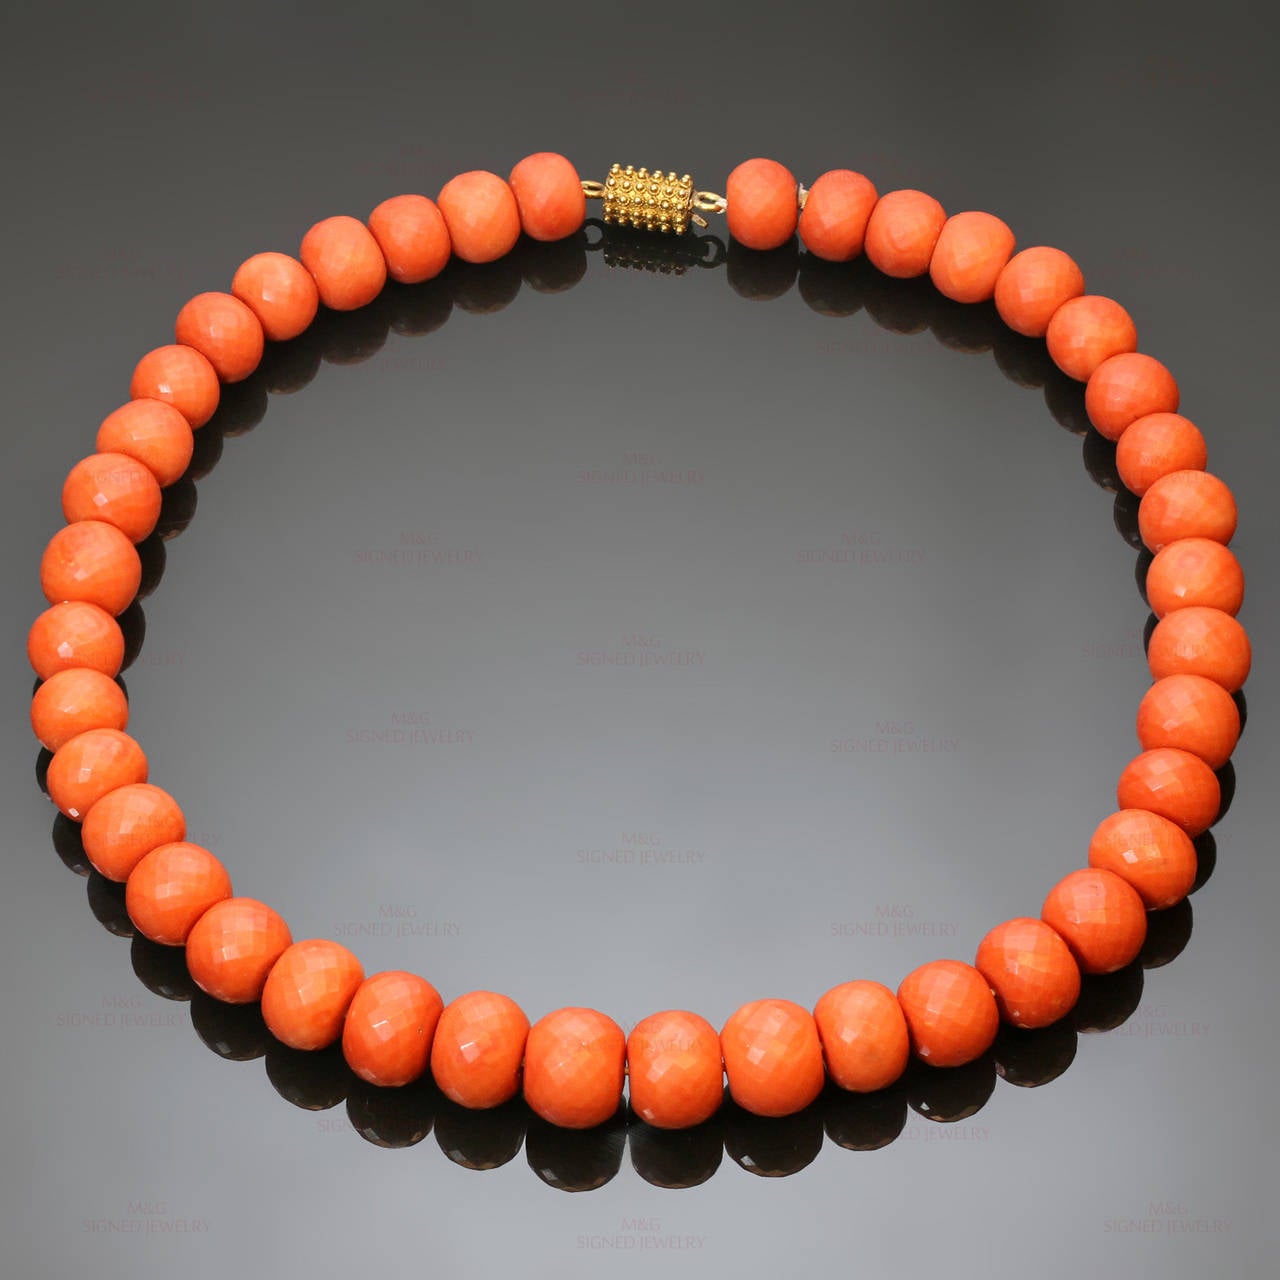 This fabulous 1940s necklace features red coral beads and a yellow gold clasp. The clasp is not stamped, but tested positive for 14k gold. These semi-translucent faceted beads are of Mediterranean origin and catch light beautifully. The beads